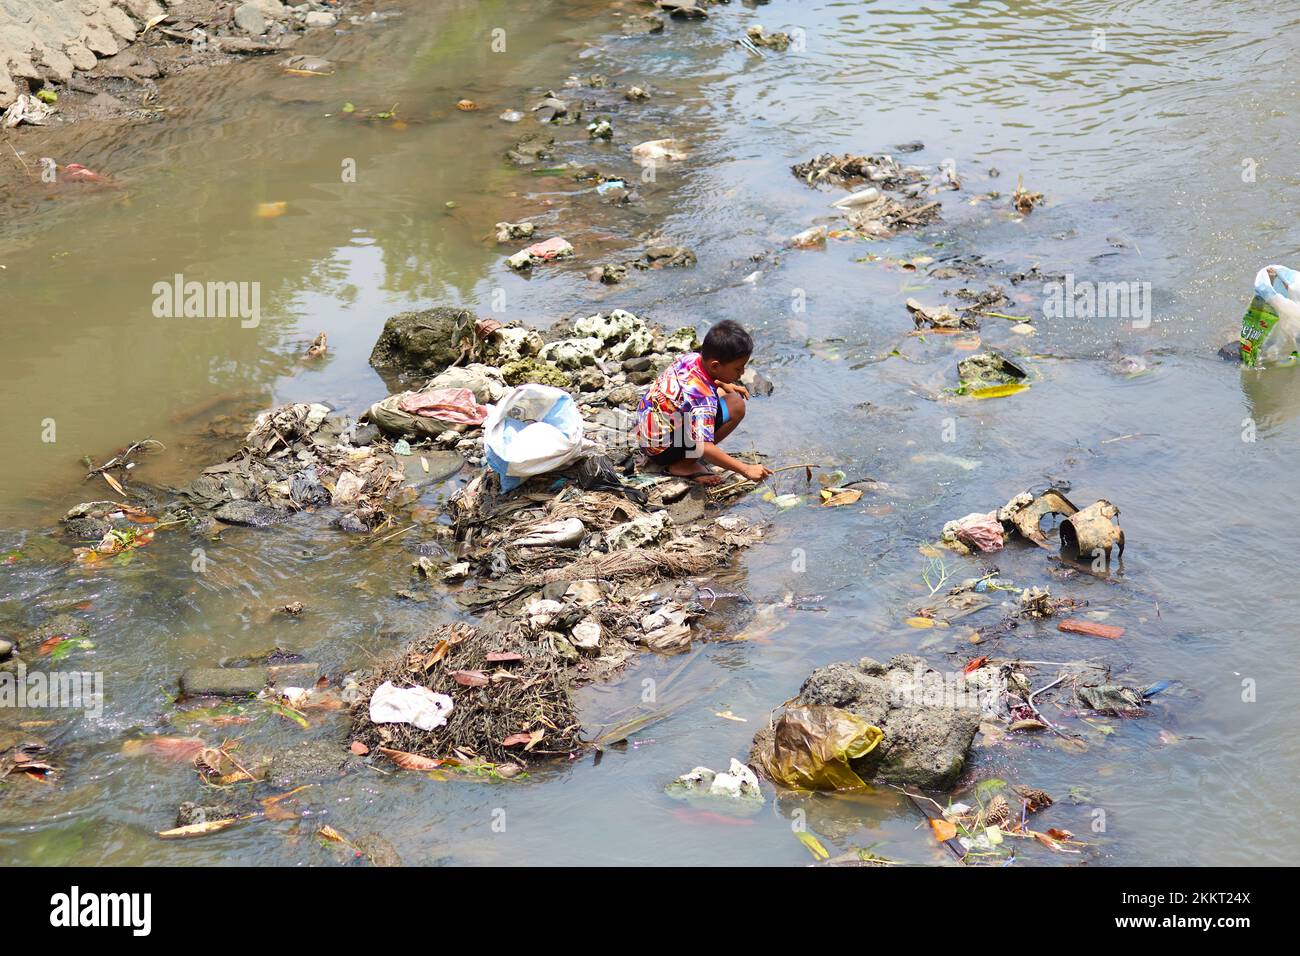 A man digs through the trash floating on the river in search of something of value. Bali, Indonesia - 03.01.2018 Stock Photo